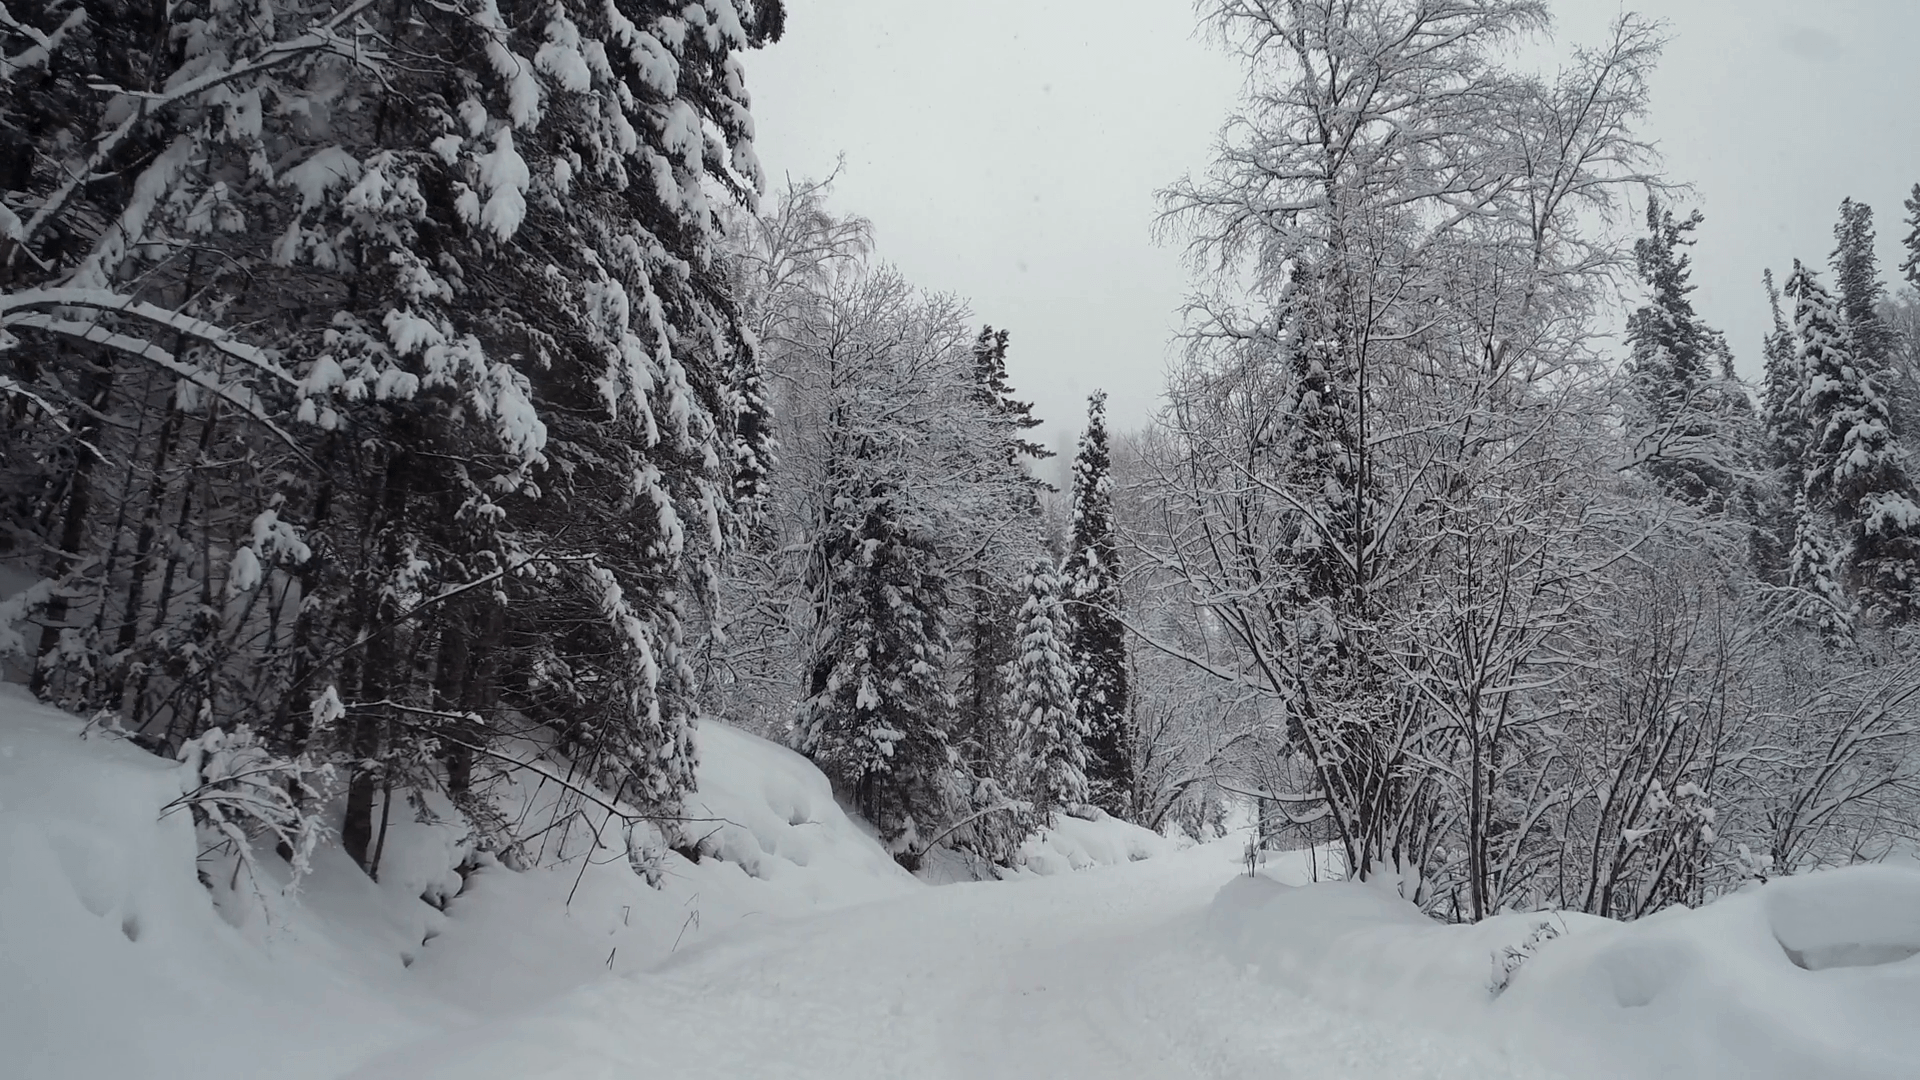 Walking along road in winter taiga forest under heavy snow on the